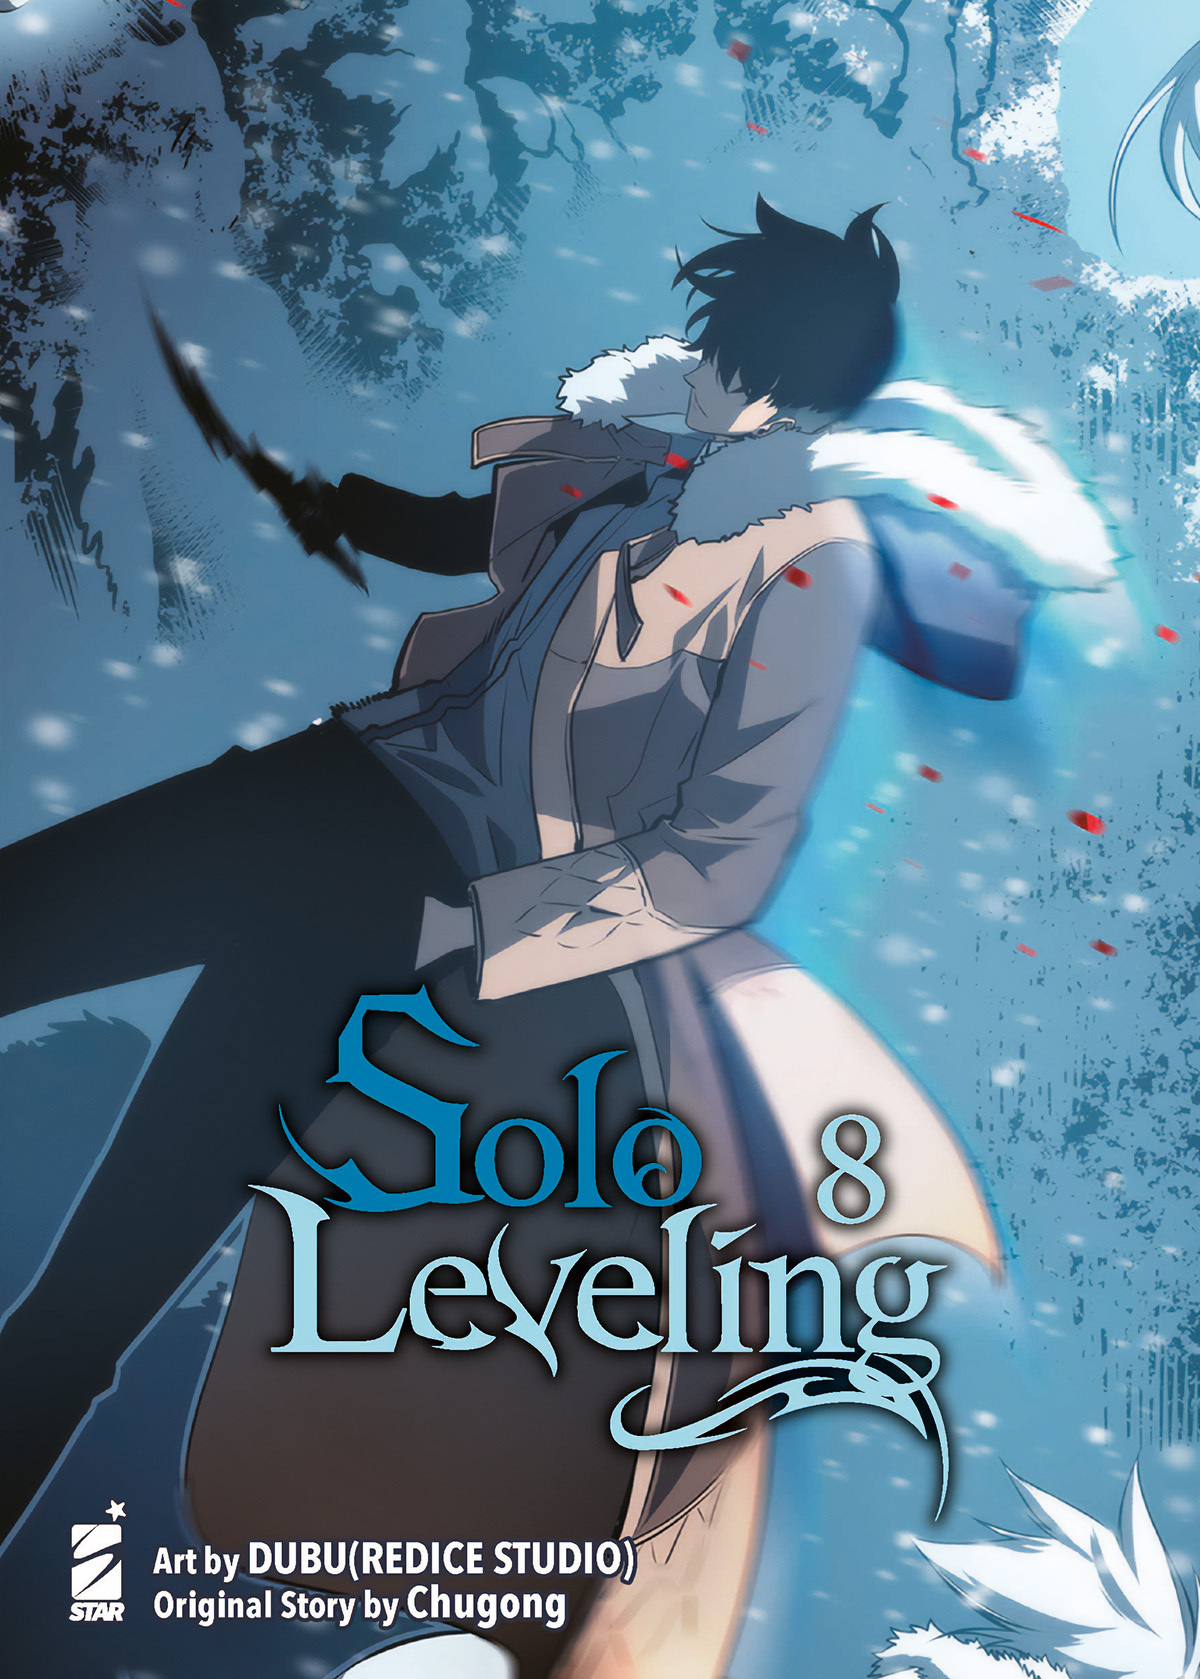 Solo Leveling Tome 8, Mangas